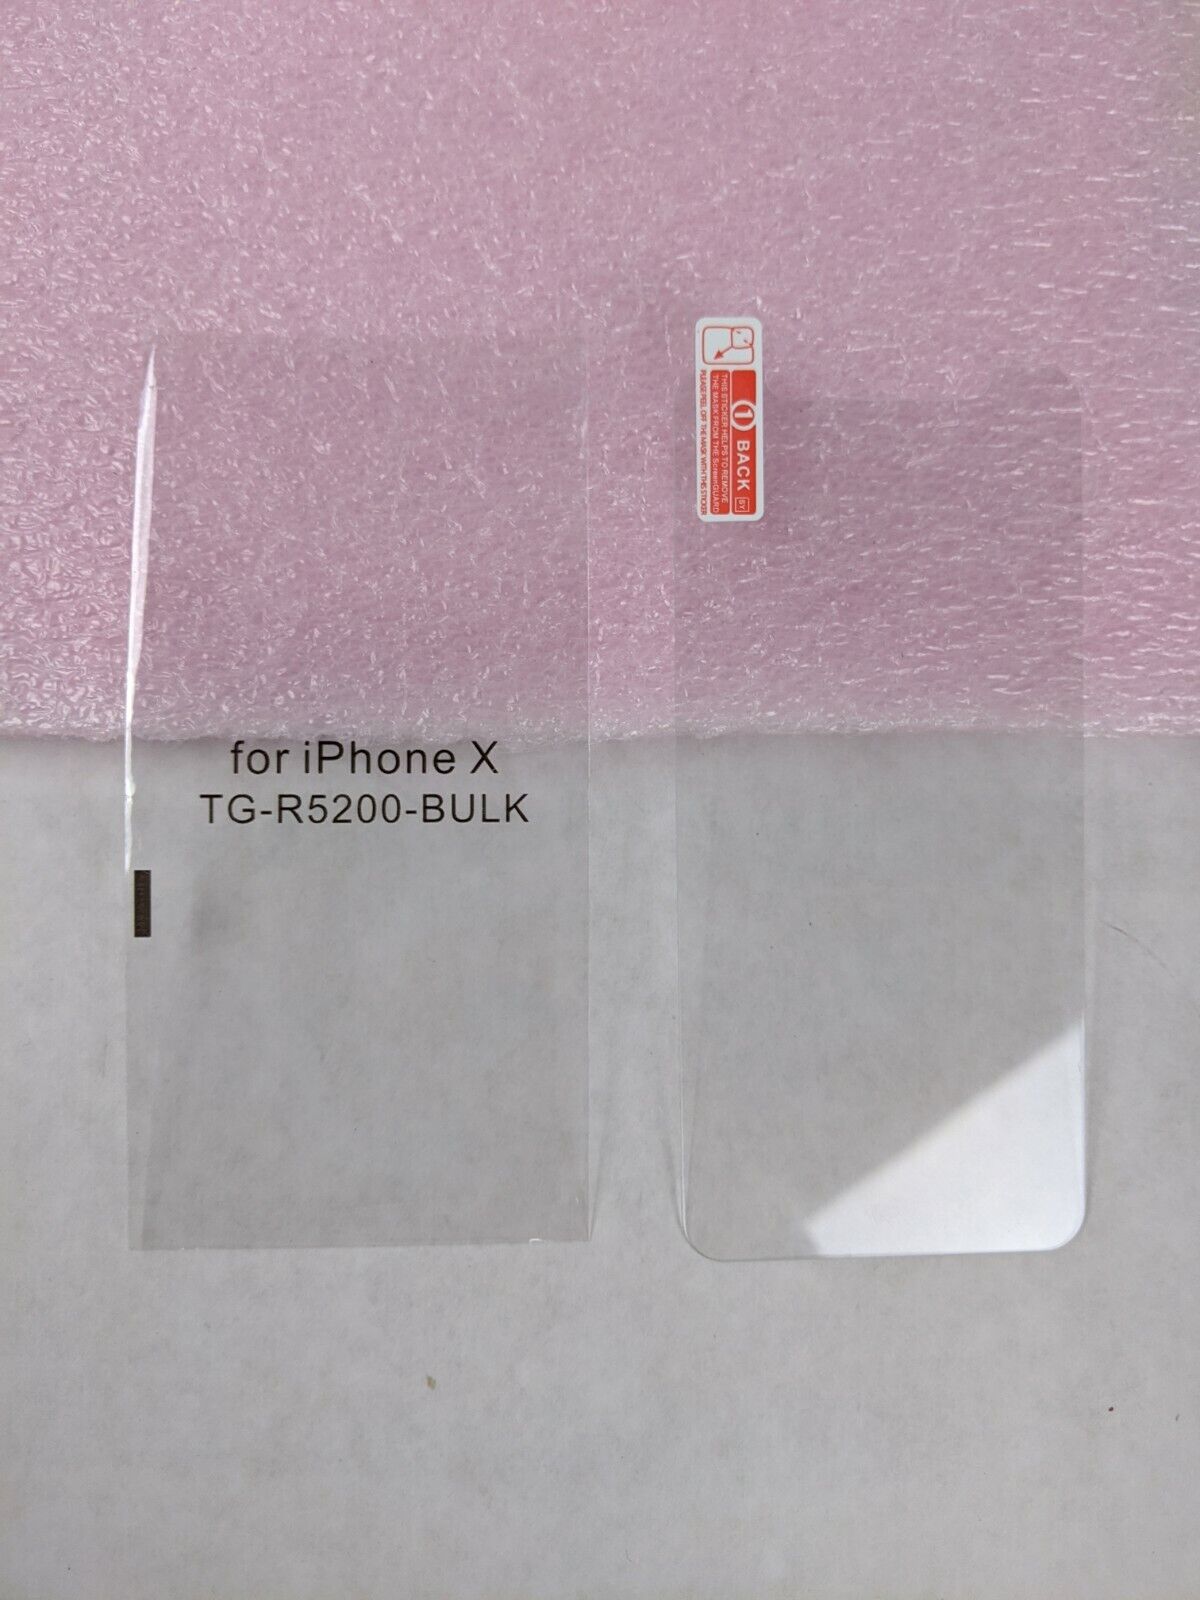 Unbranded Screen Protector for iPhone X TG-R5200-BULK